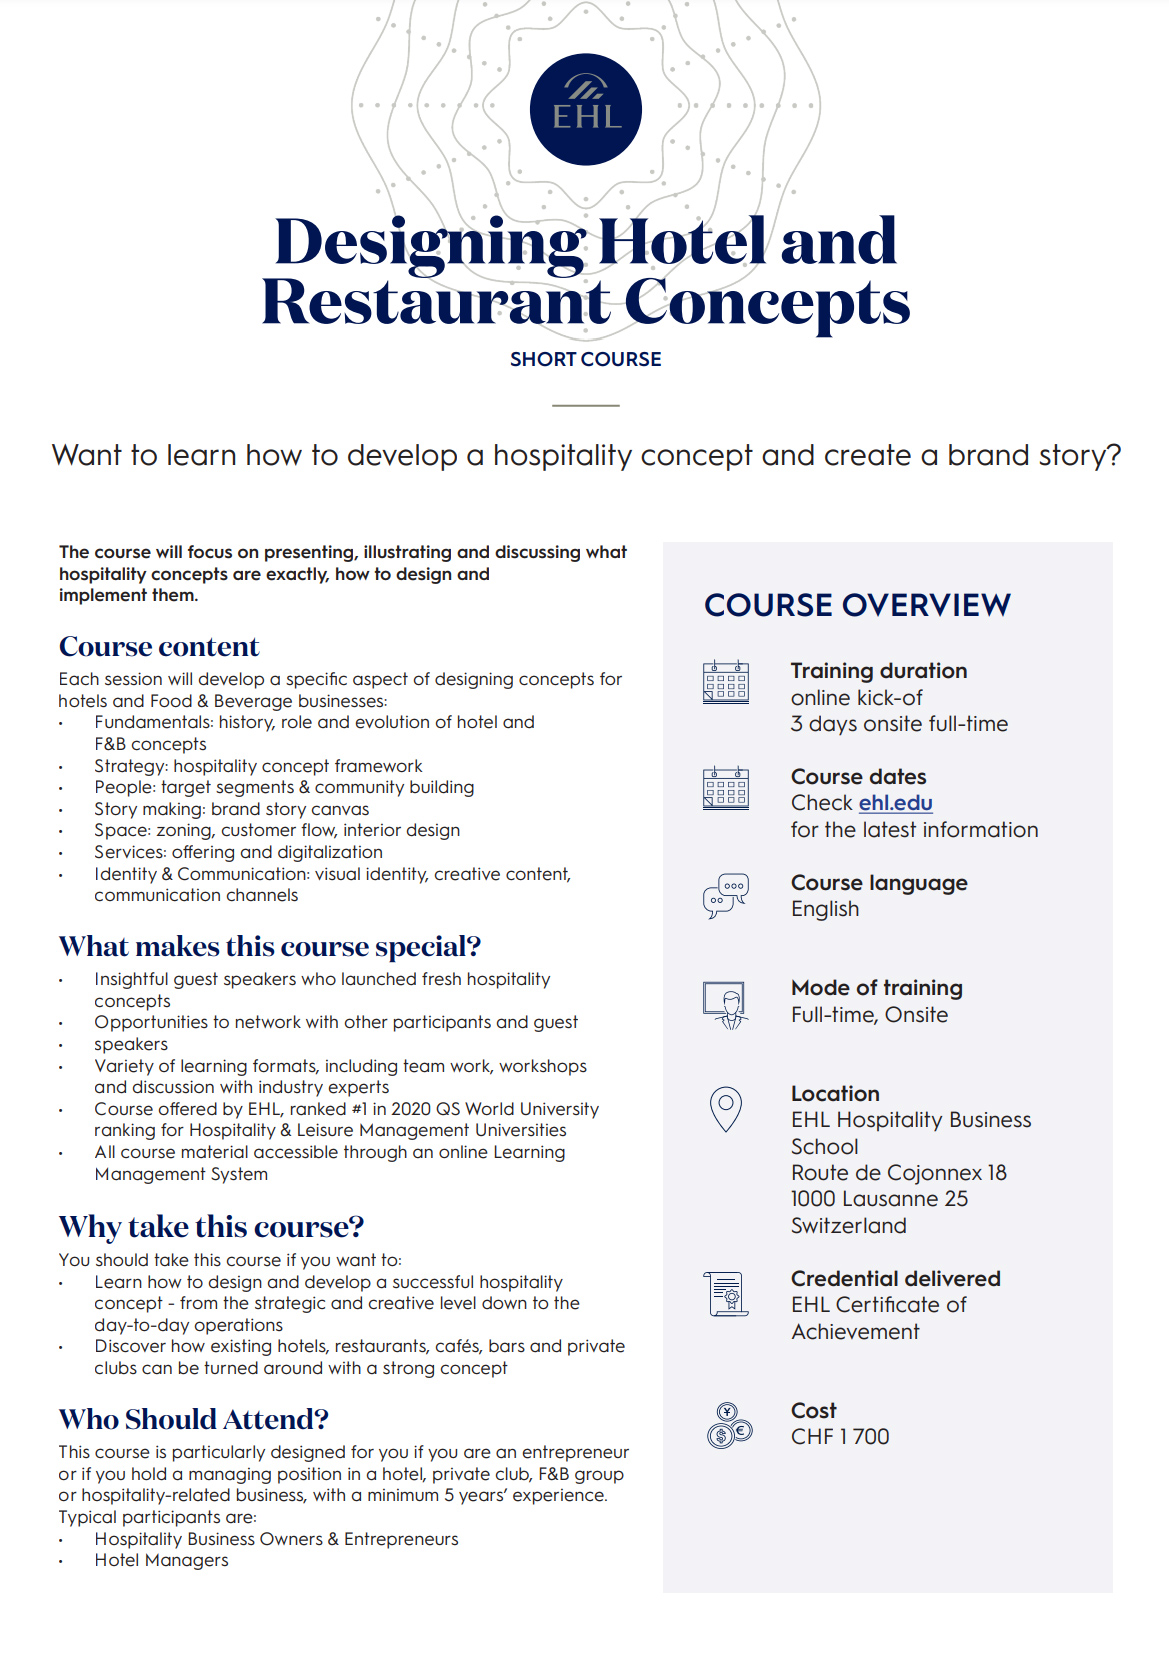 Short 3-Day Course at EHL Hospitality Business School: Designing Hotel and Restaurant Concepts— Photo by EHL